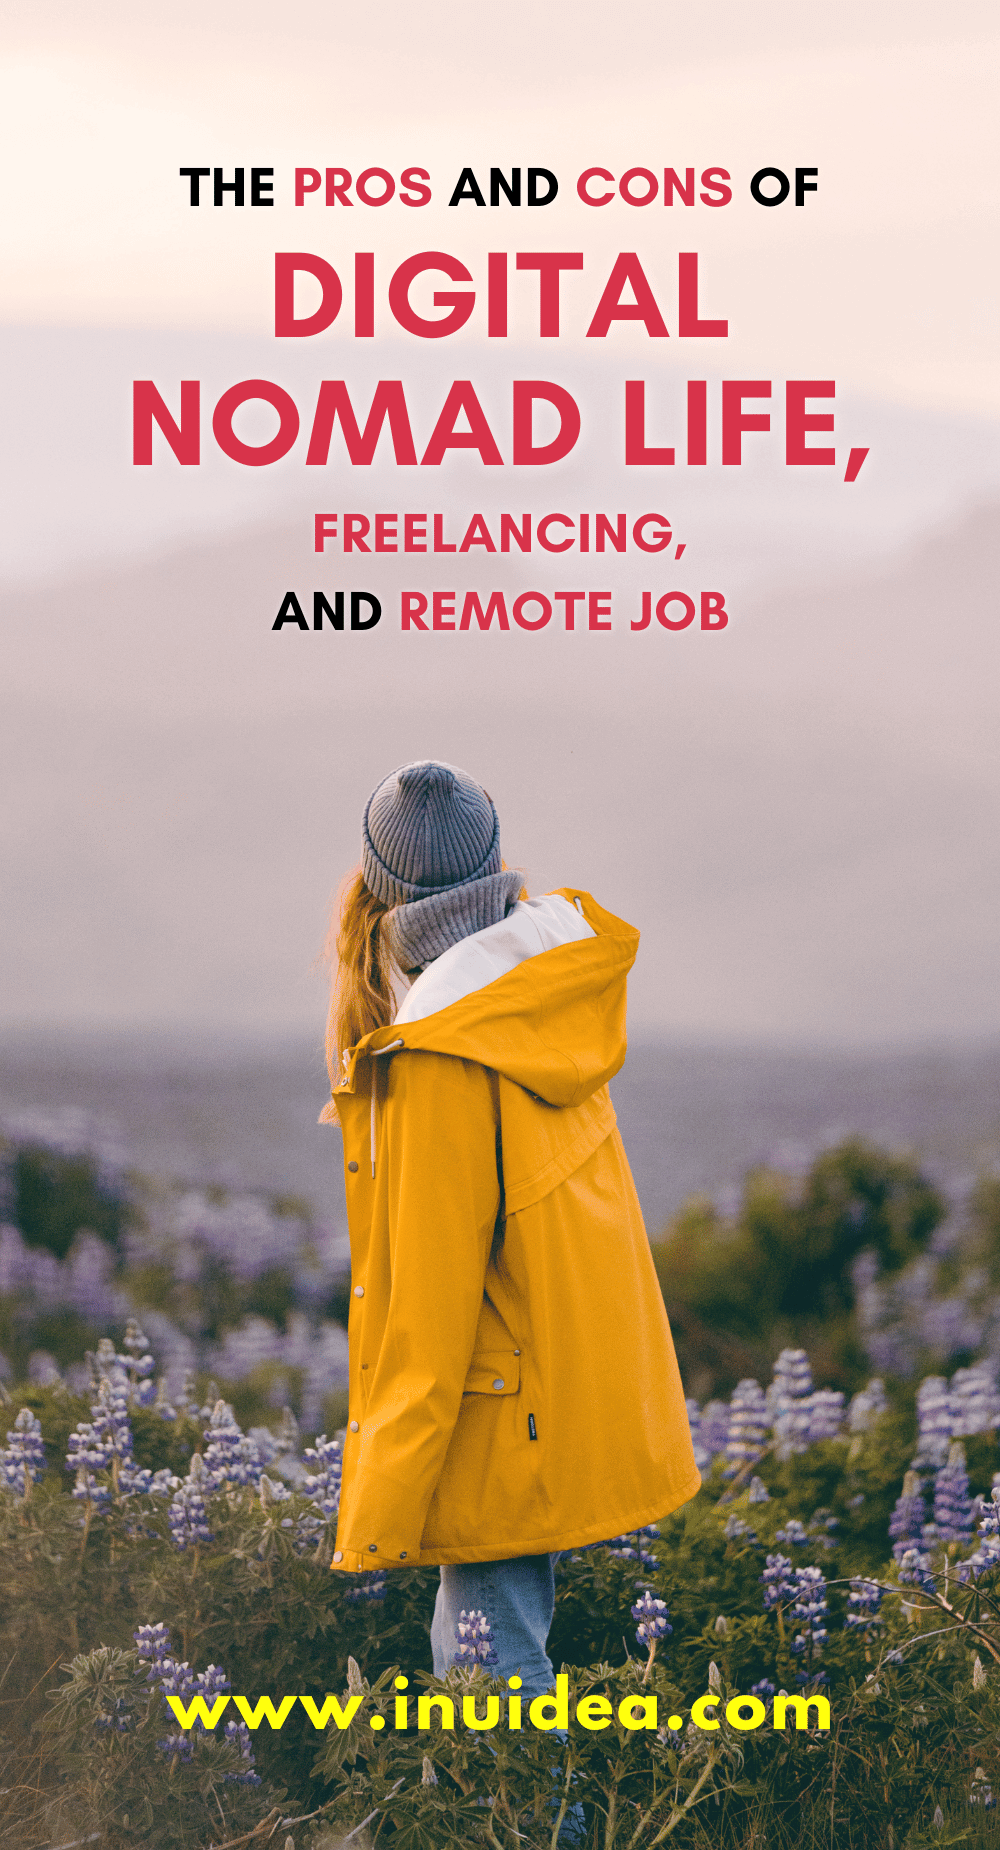 The Pros and Cons of Digital Nomad Life, Freelancing, and Remote Job